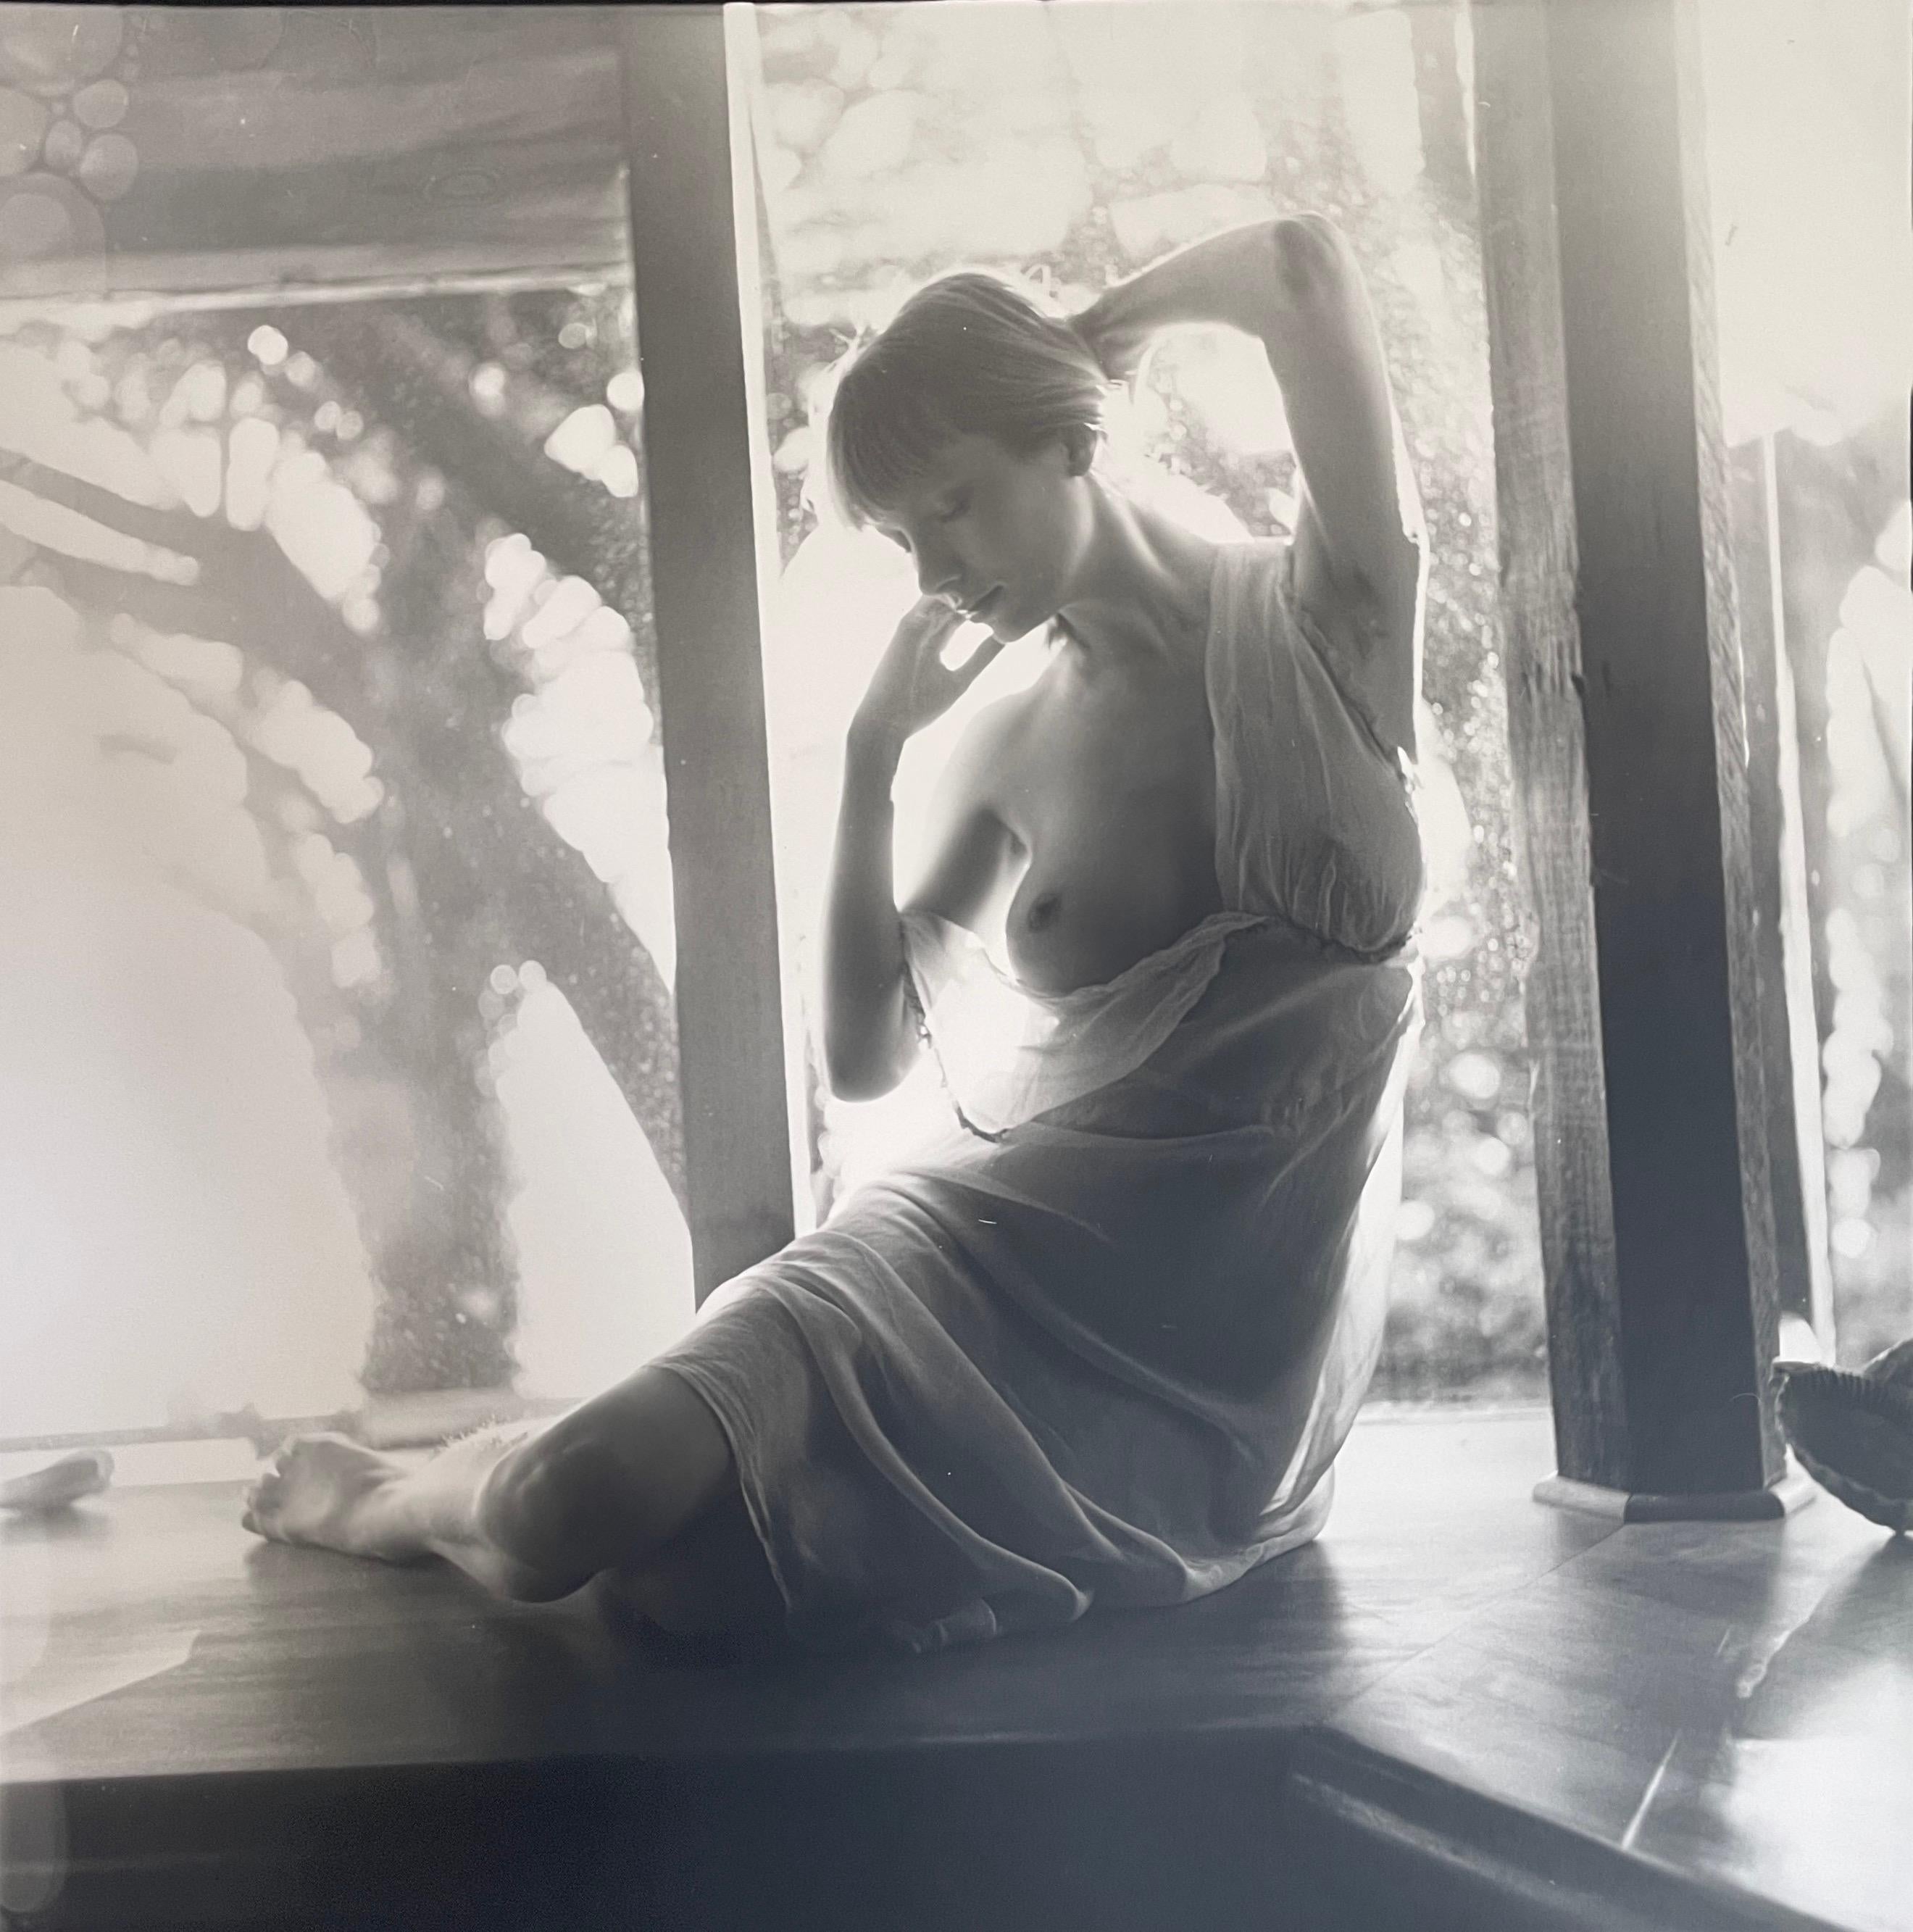 Silk, Big Sur California - Nude in Lingerie - Photograph by Alli Wood